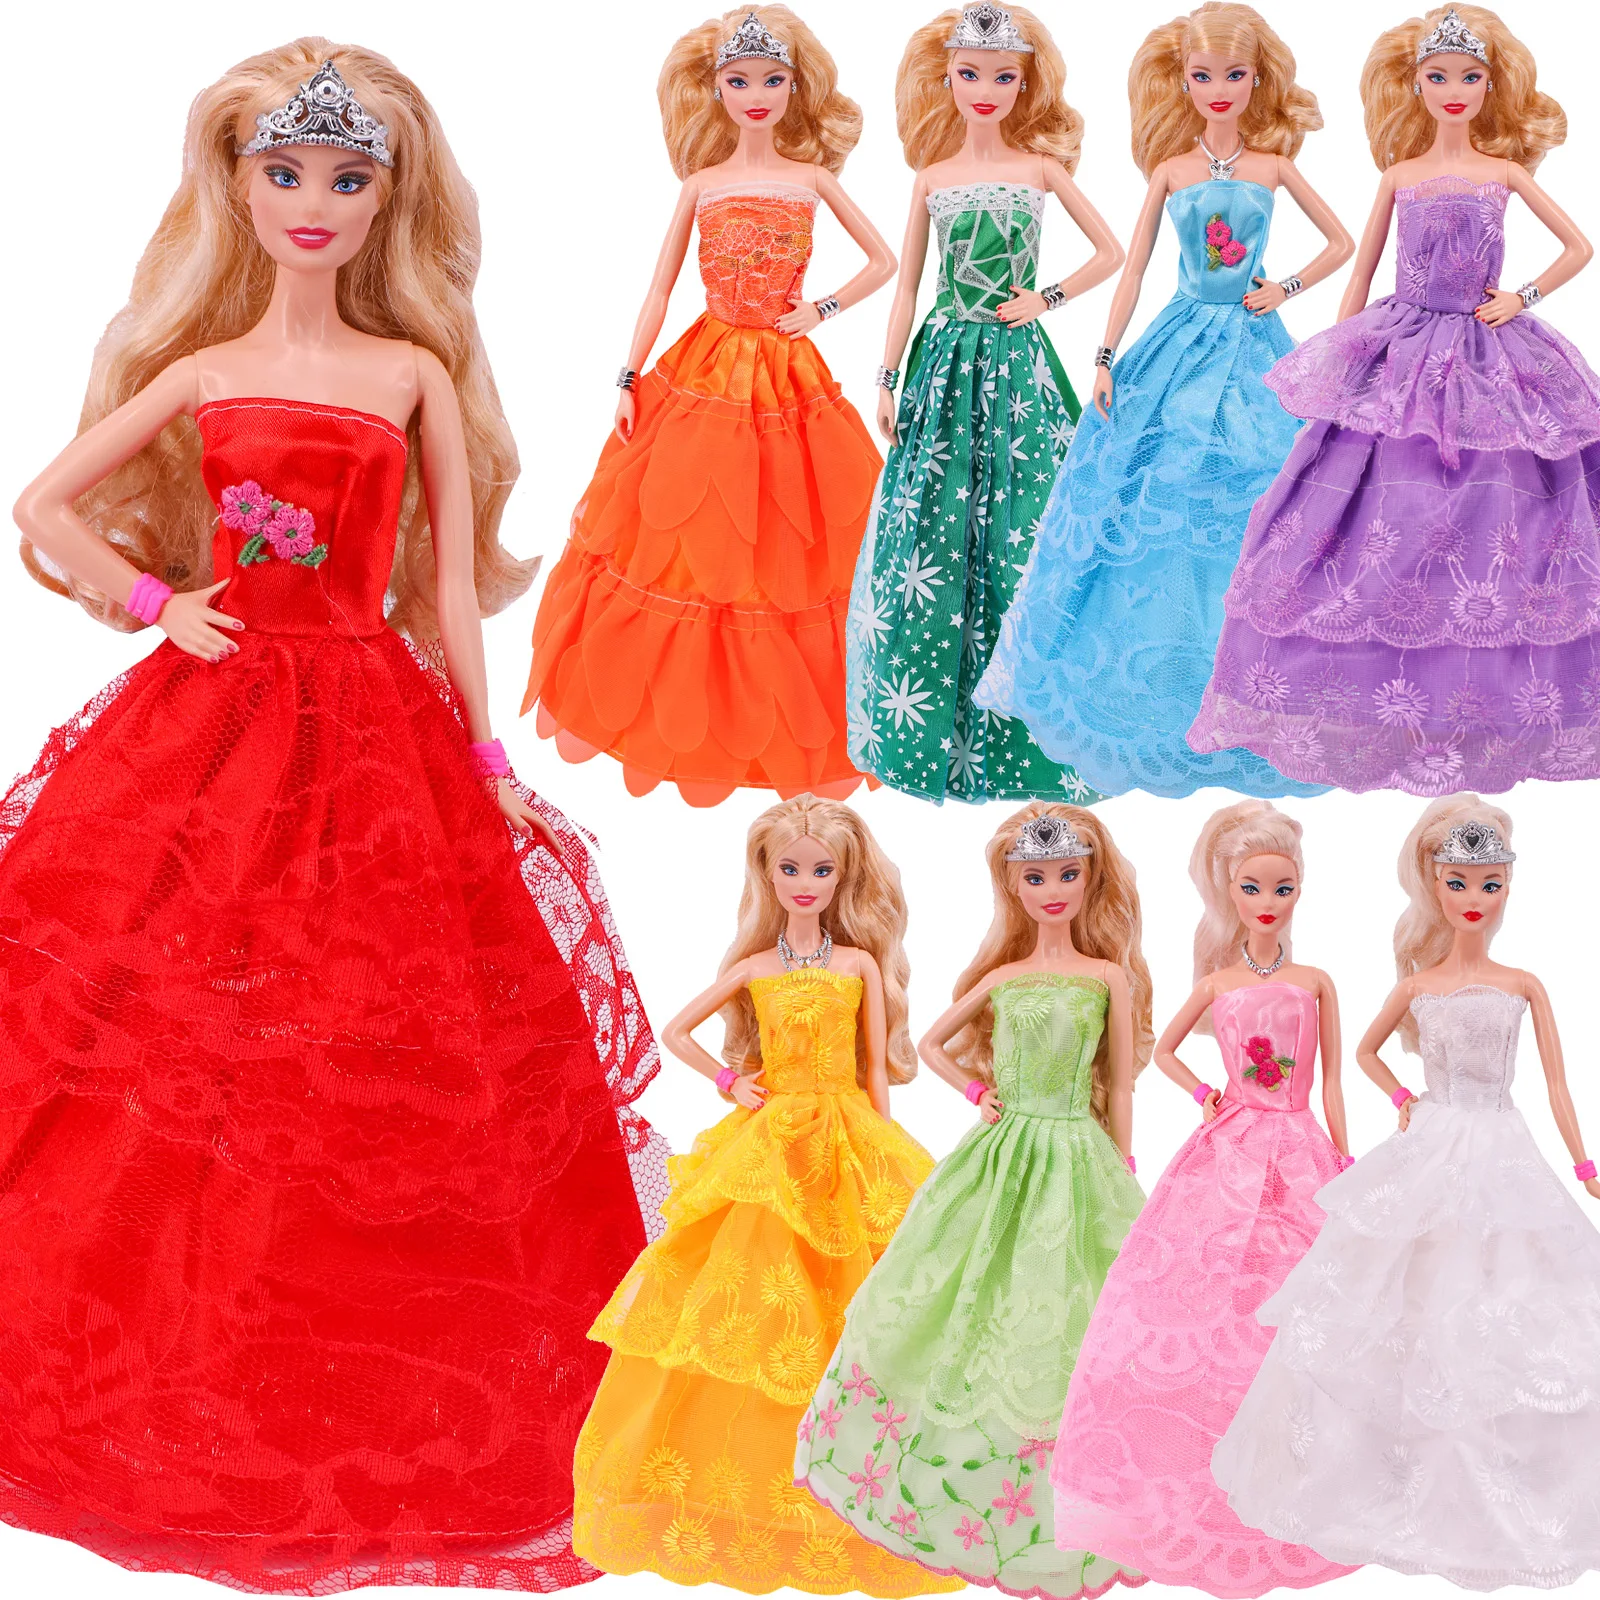 

Barbies Doll 1 Evening Dress+4 Pieces Random Accessories For 11.5inch Barbies Doll Cocktail Daily Casual Clothing Accessories